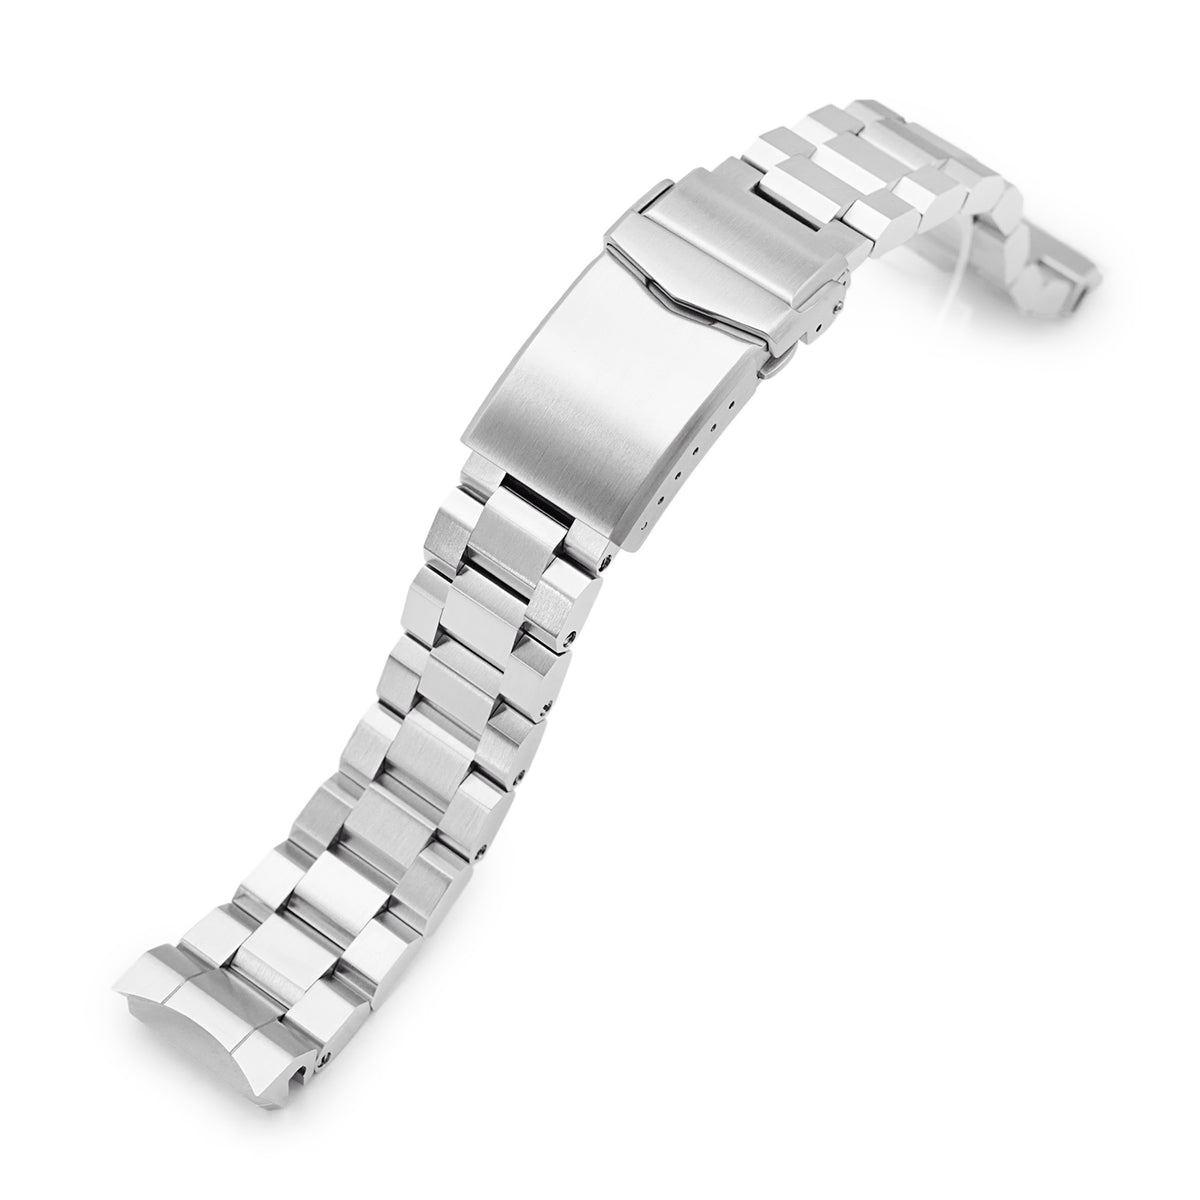 20mm Hexad Watch Band for Seiko MM300 Prospex Marinemaster SBDX001, 316L Stainless Steel V-Clasp Button Double Lock Strapcode Watch Bands